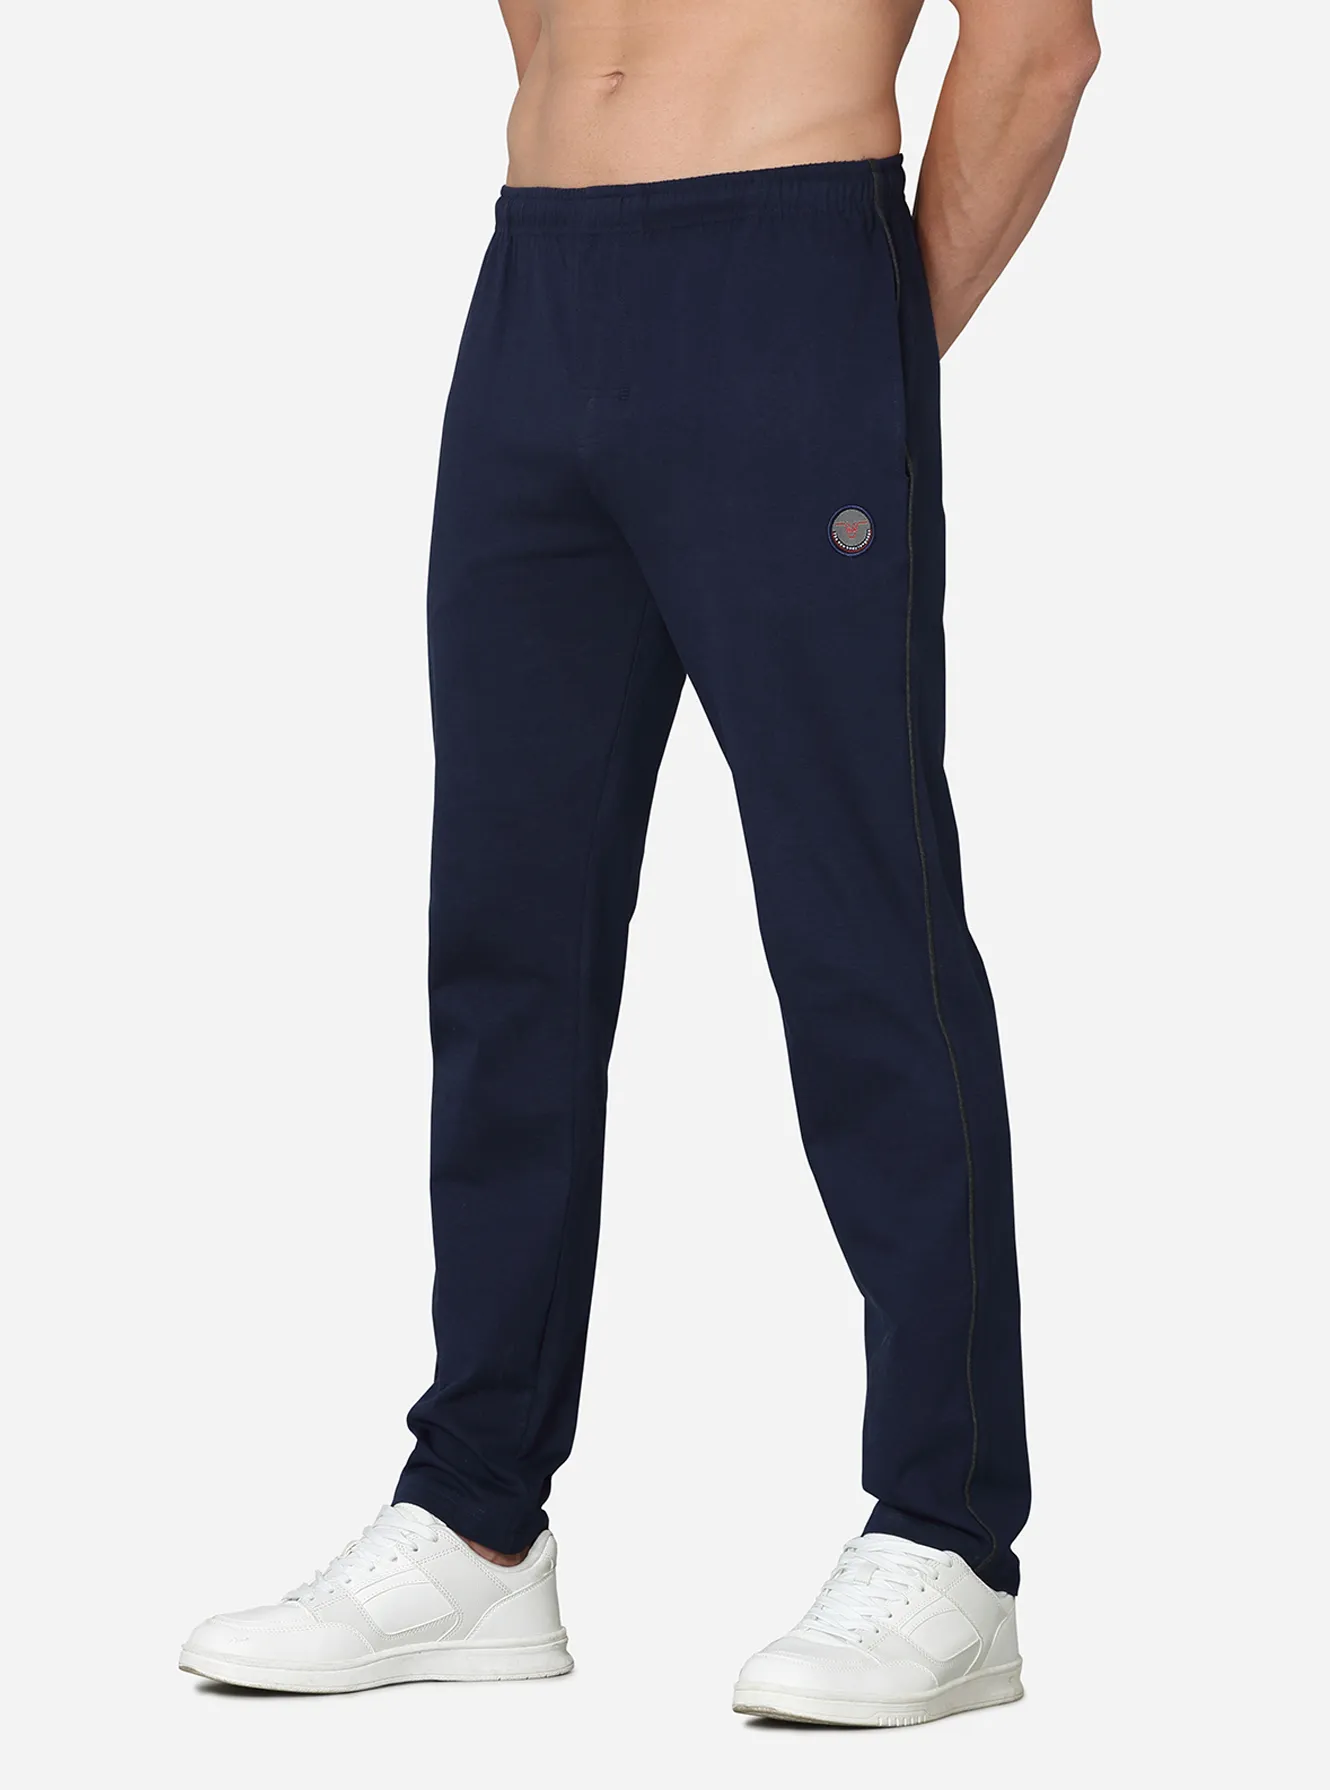 Buy Super Combed Cotton Elastane Slim Fit Trackpants With Side Pockets -  Black 1301 | Jockey India